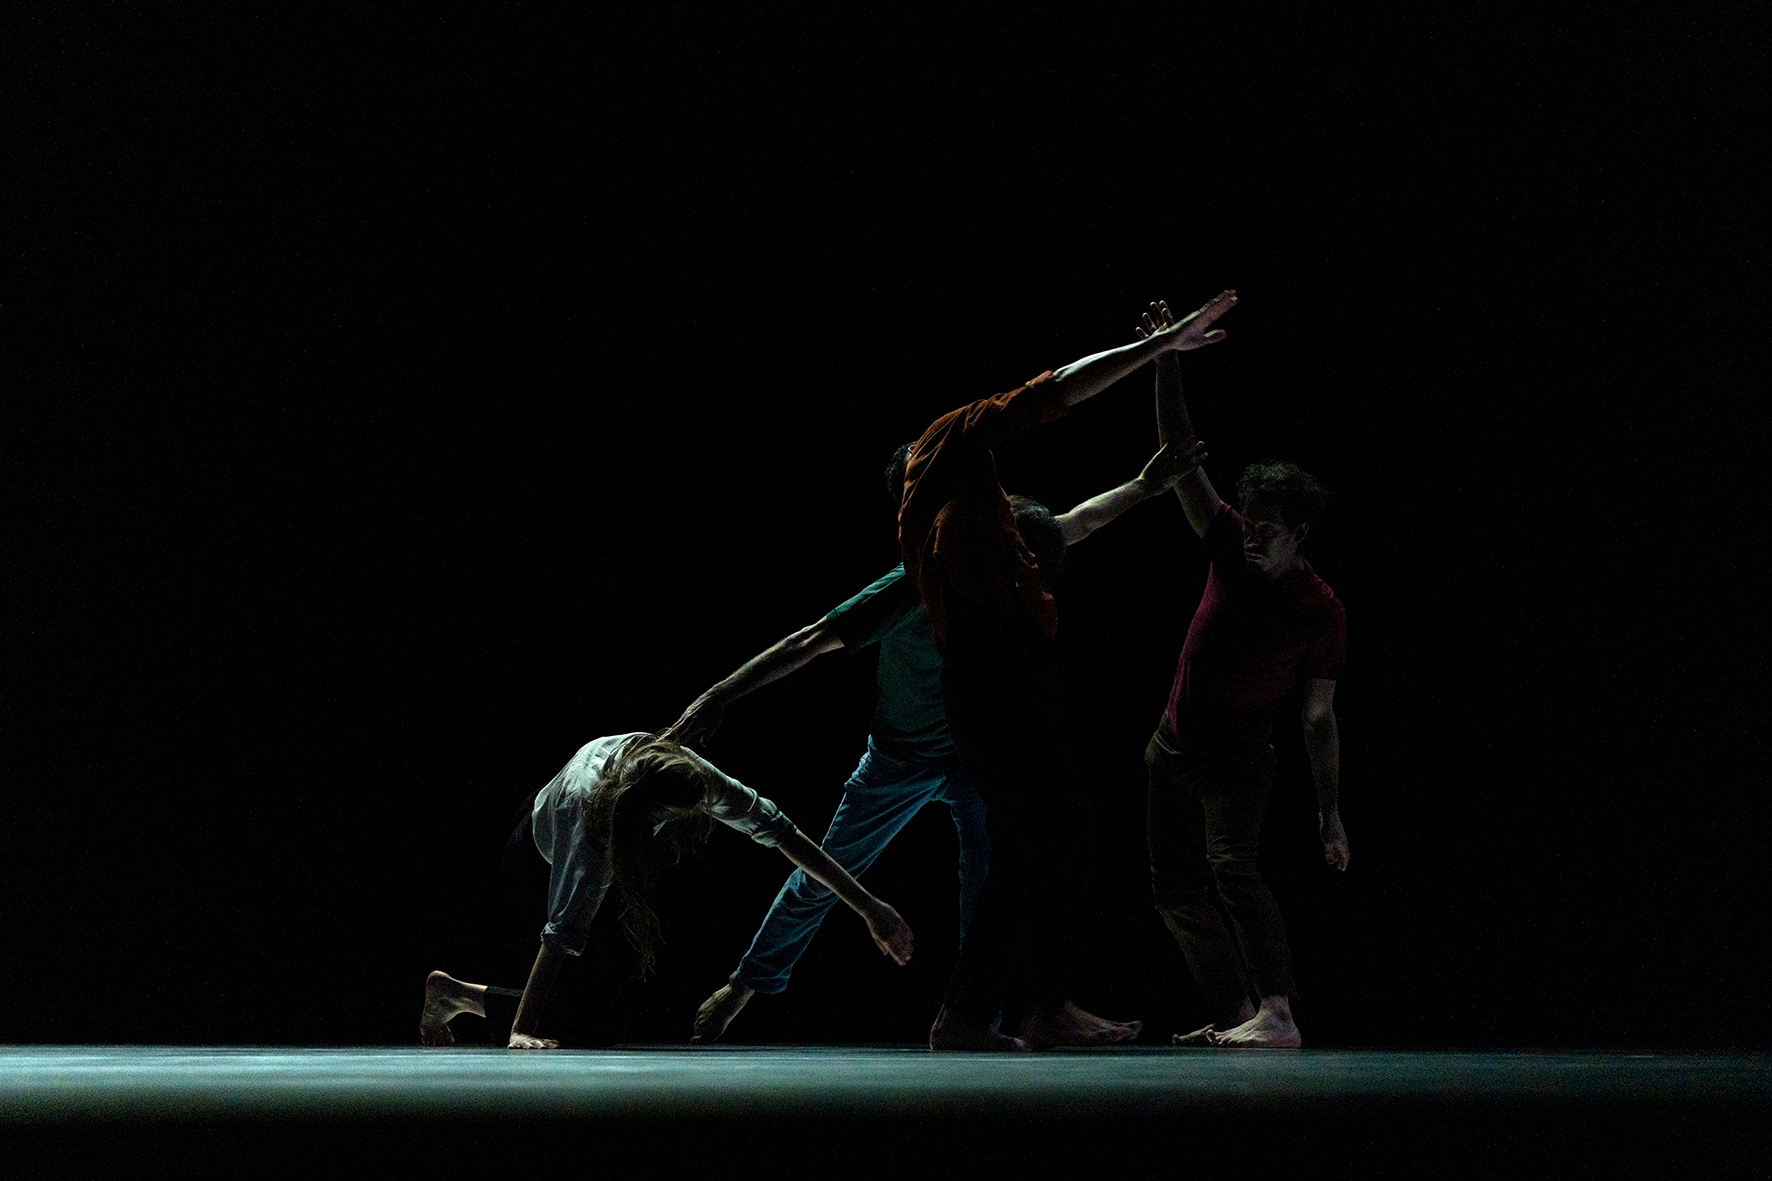 Dancers creating a form on a dark stage